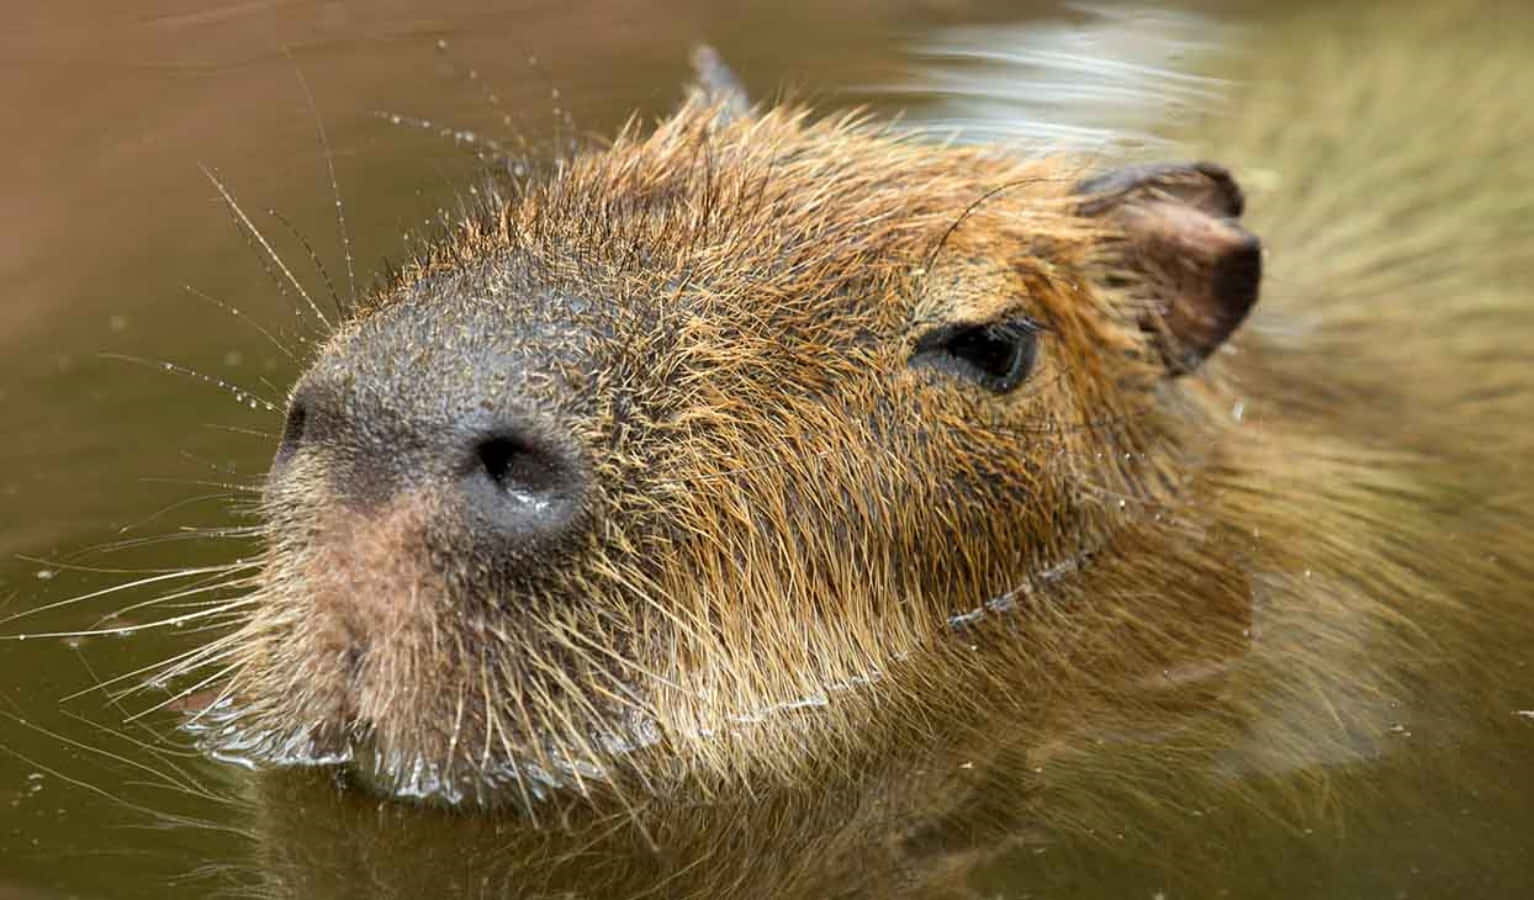 A capybara poses for a picture in the grass